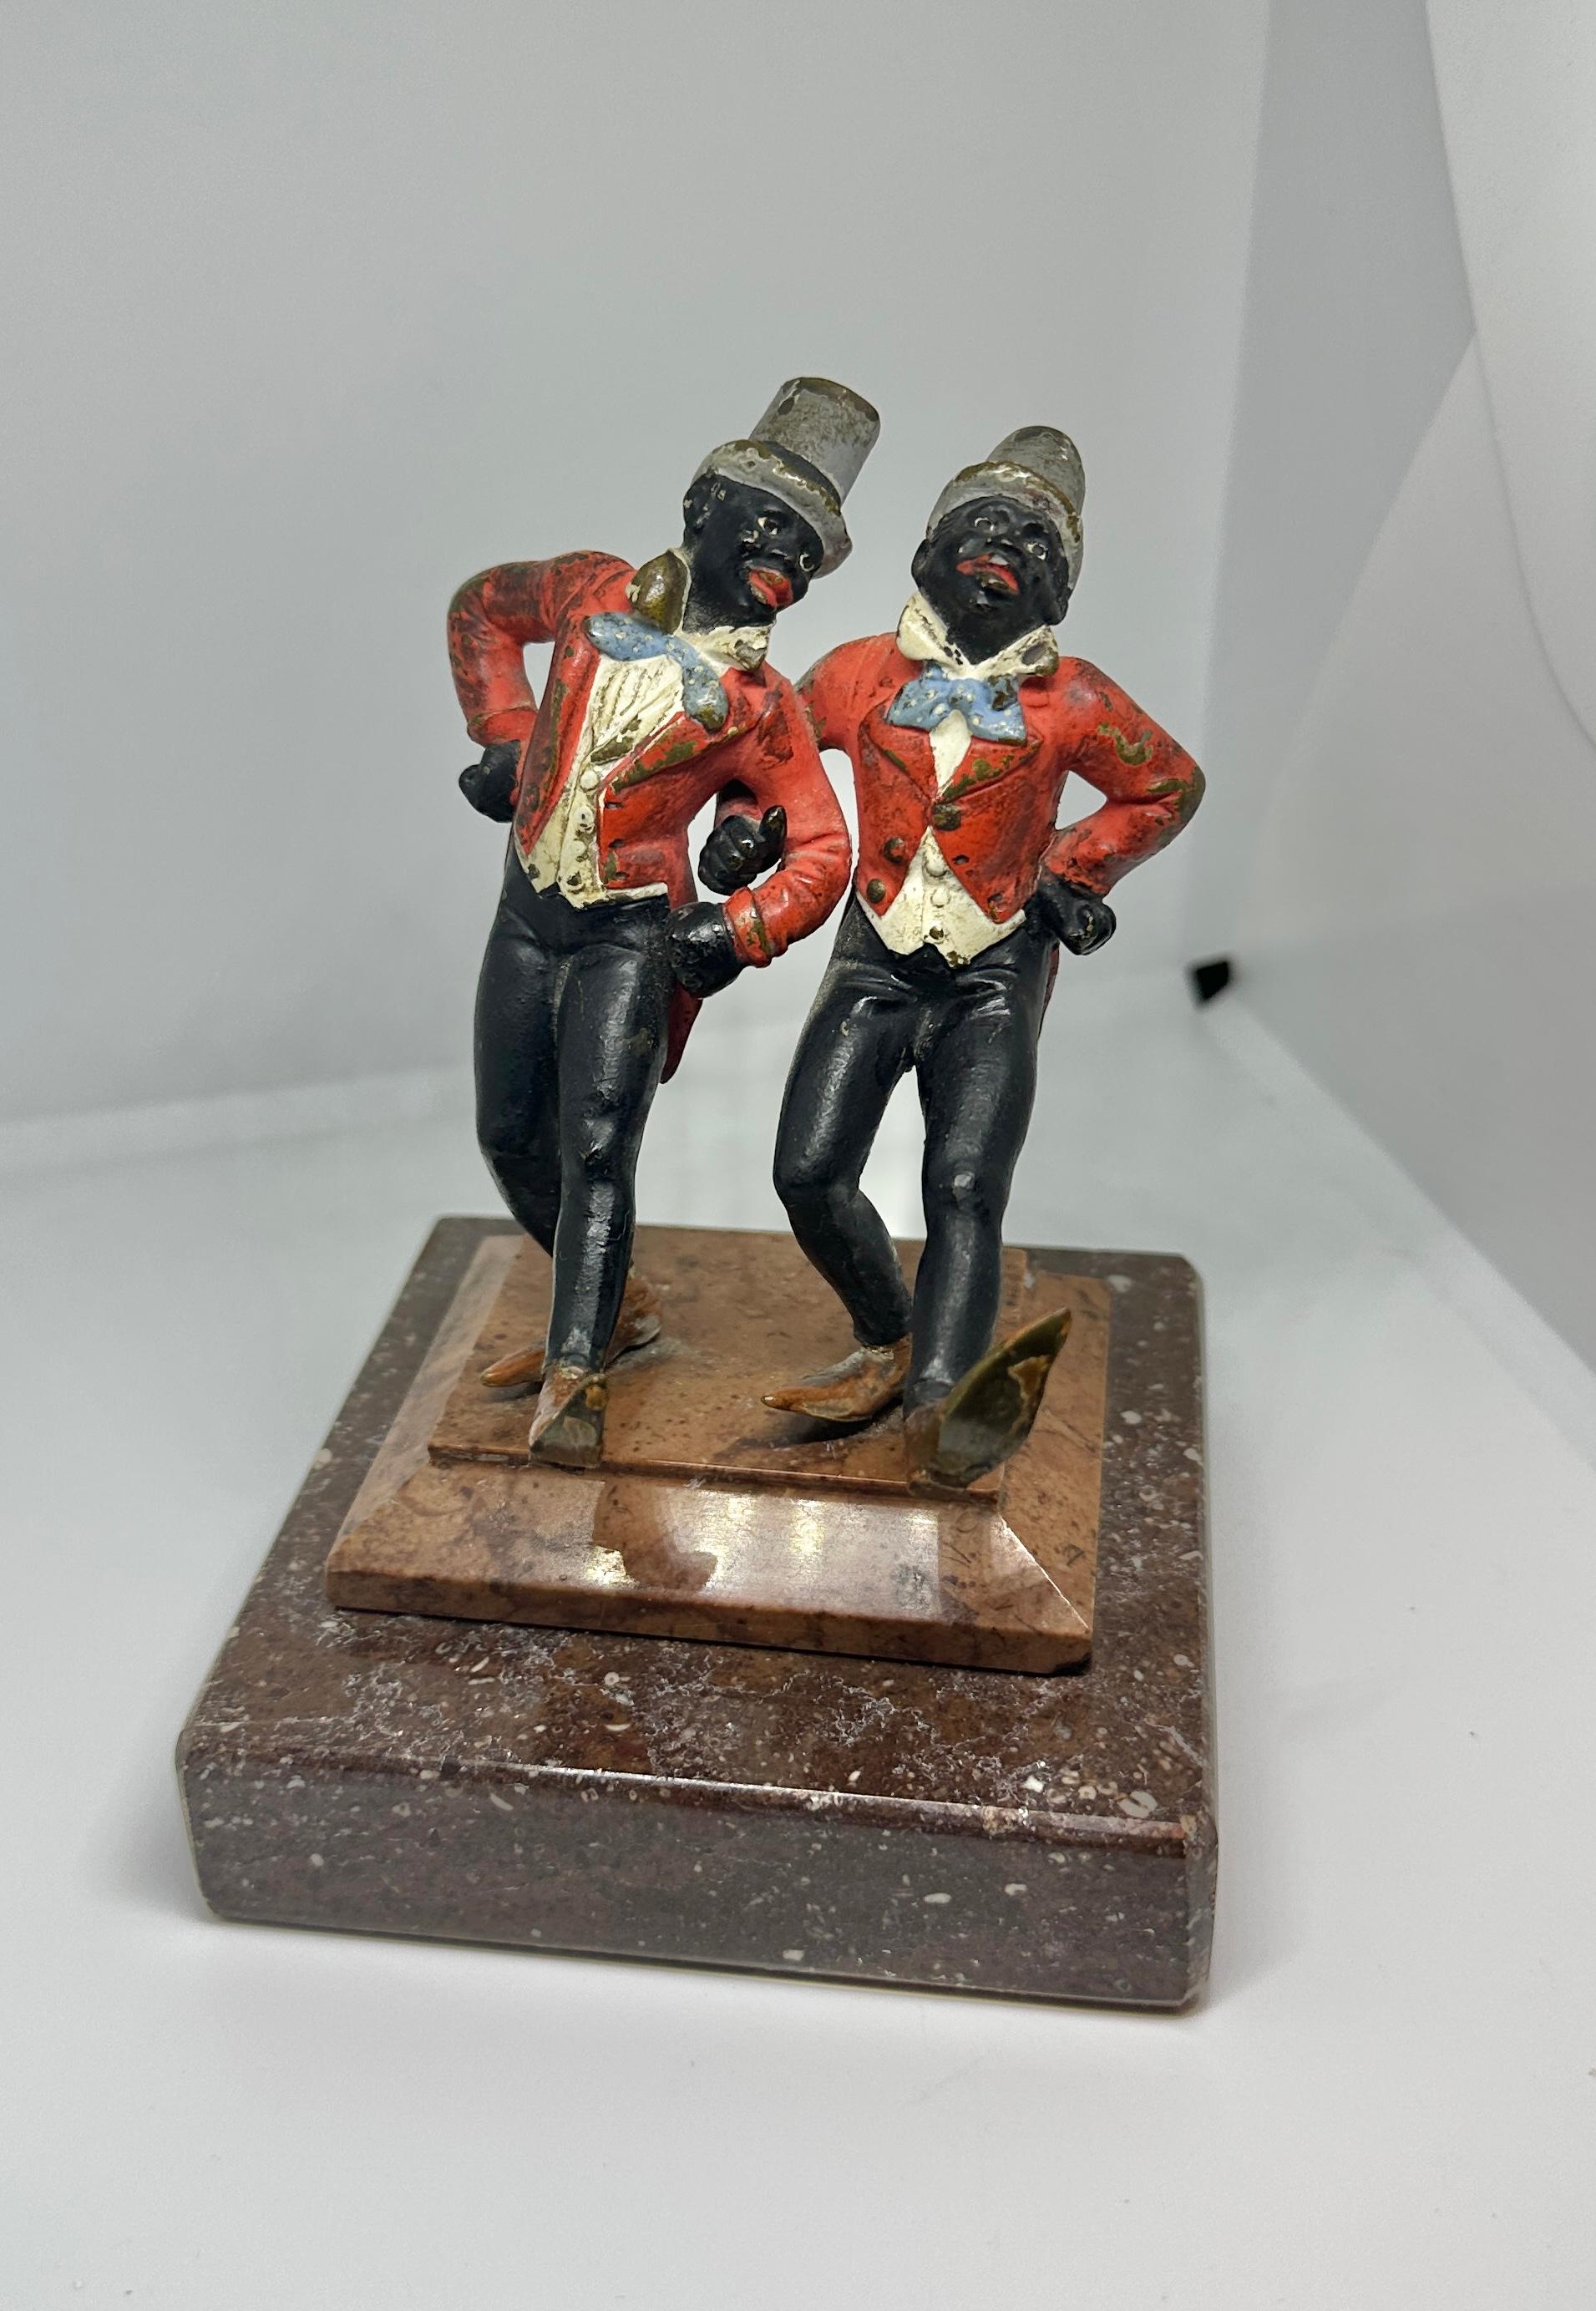 THIS IS A SUPERB AND VERY RARE PAIR OF TWO BLACK AMERICANA DANCING GENTLEMEN.  THE BRONZE SCULPTURES ARE ABSOLUTELY CHARMING ANTIQUE AUSTRIAN VIENNA BRONZE.
These wonderful antique Austrian Vienna Bronze (Bronze de Vienne, Wiener Bronze, Cold